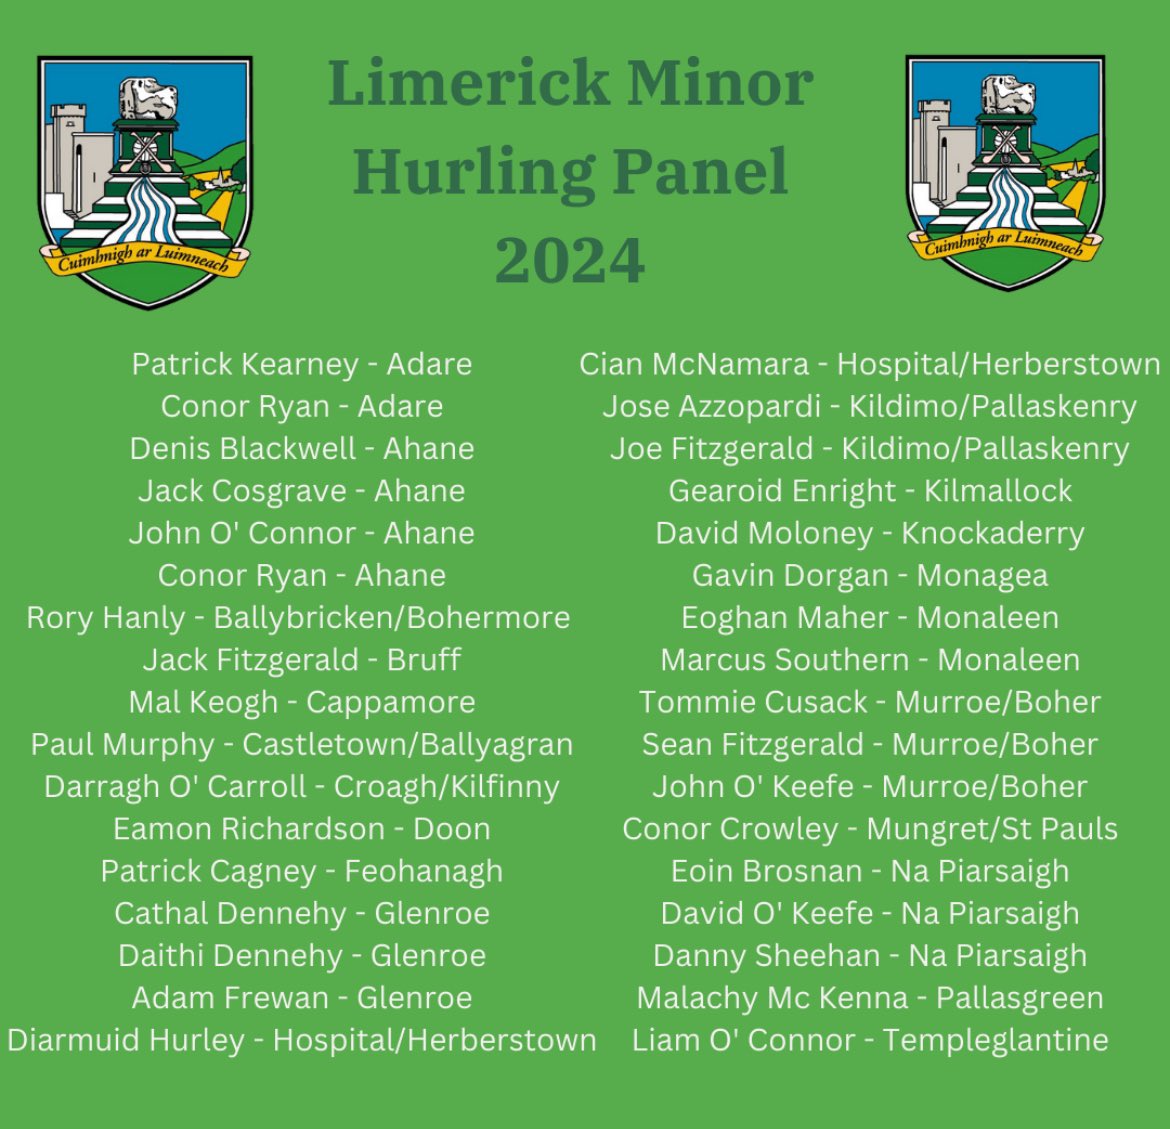 Limerick Minor Hurling Panel for 2024: The Limerick Minor hurling manager Shane Dowling and his management team has released their 2024 hurling Panel, All in Limerick GAA would like to wish all involved with the minor hurling team the very best for 2024